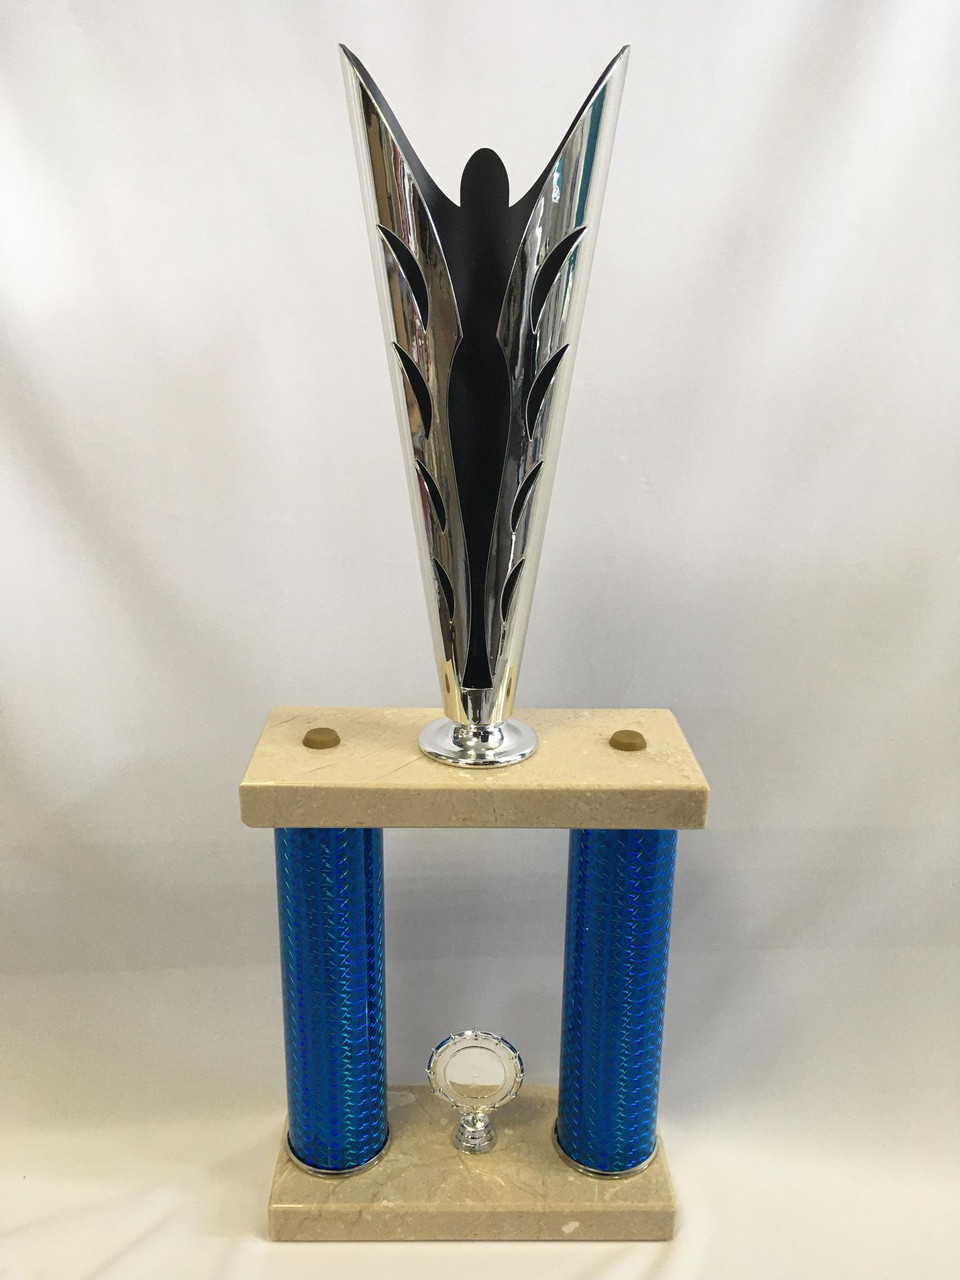 Silver & Blue Two Tier Award Dance Cheerleading Gymnastics Budget Trophy Prize Marble Base